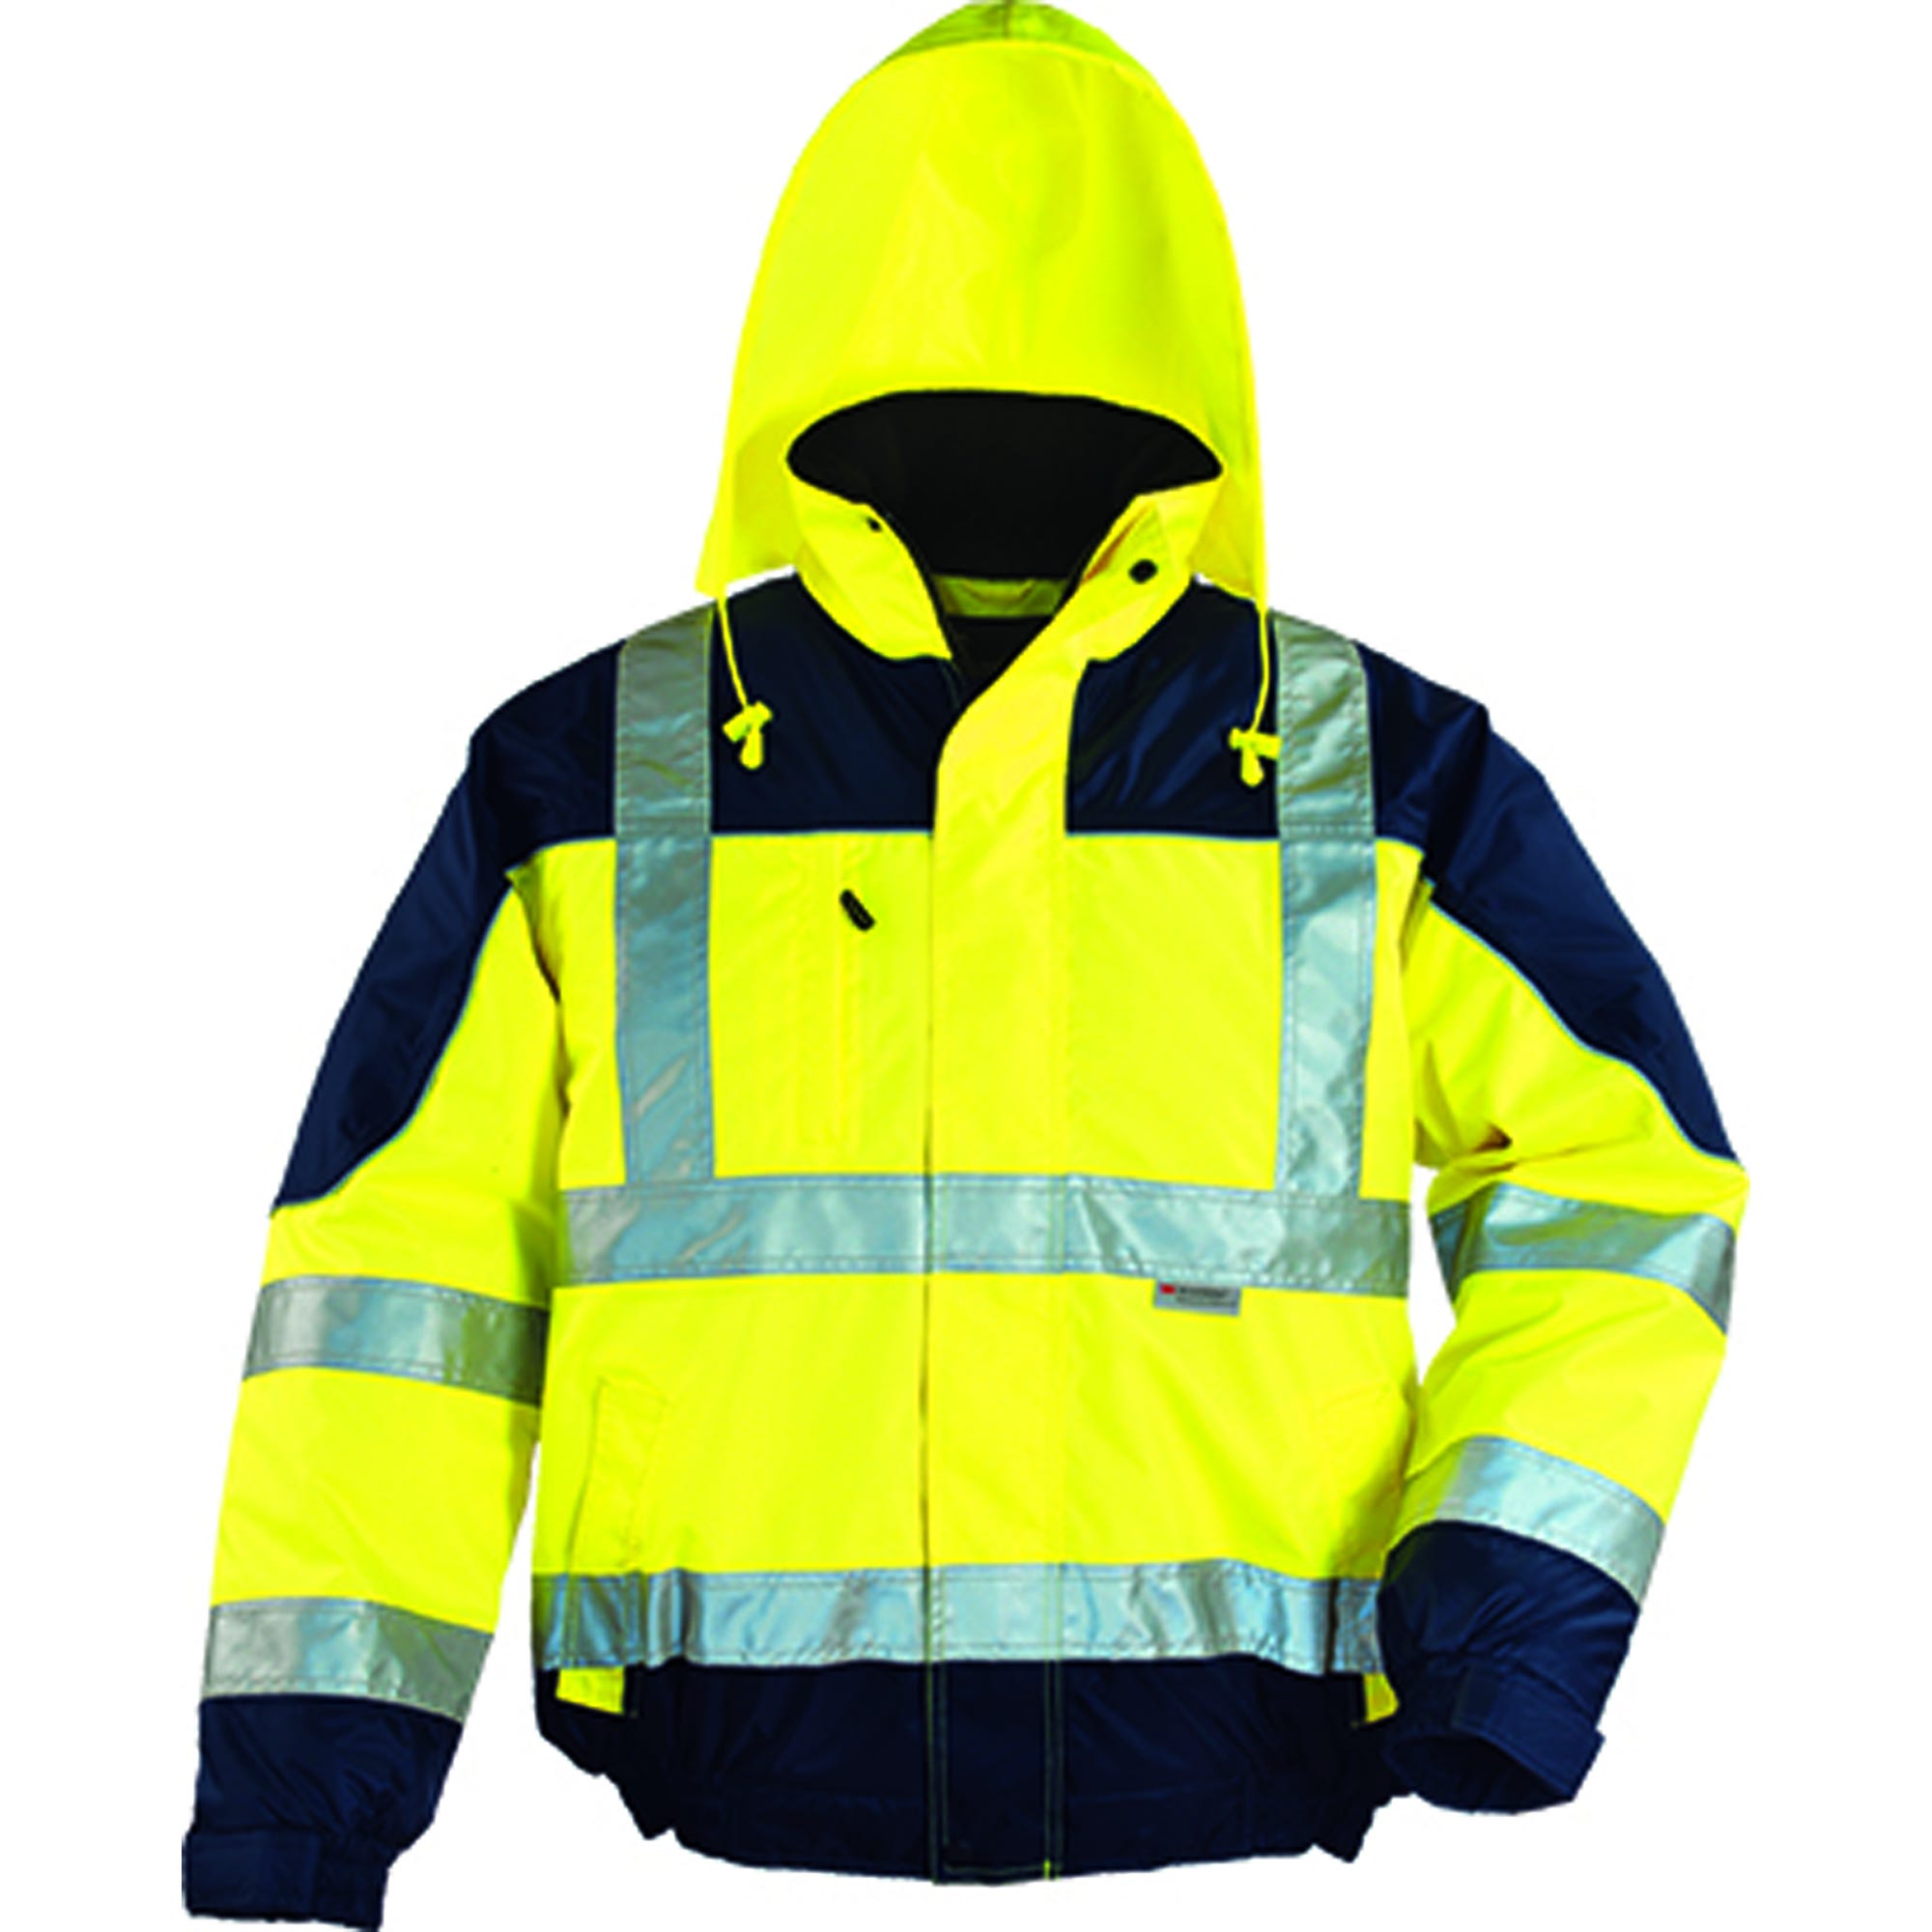 AIRPORT Blouson Jaune HV/Marine, Polyester Oxford 300D - COVERGUARD - Taille 2XL 2